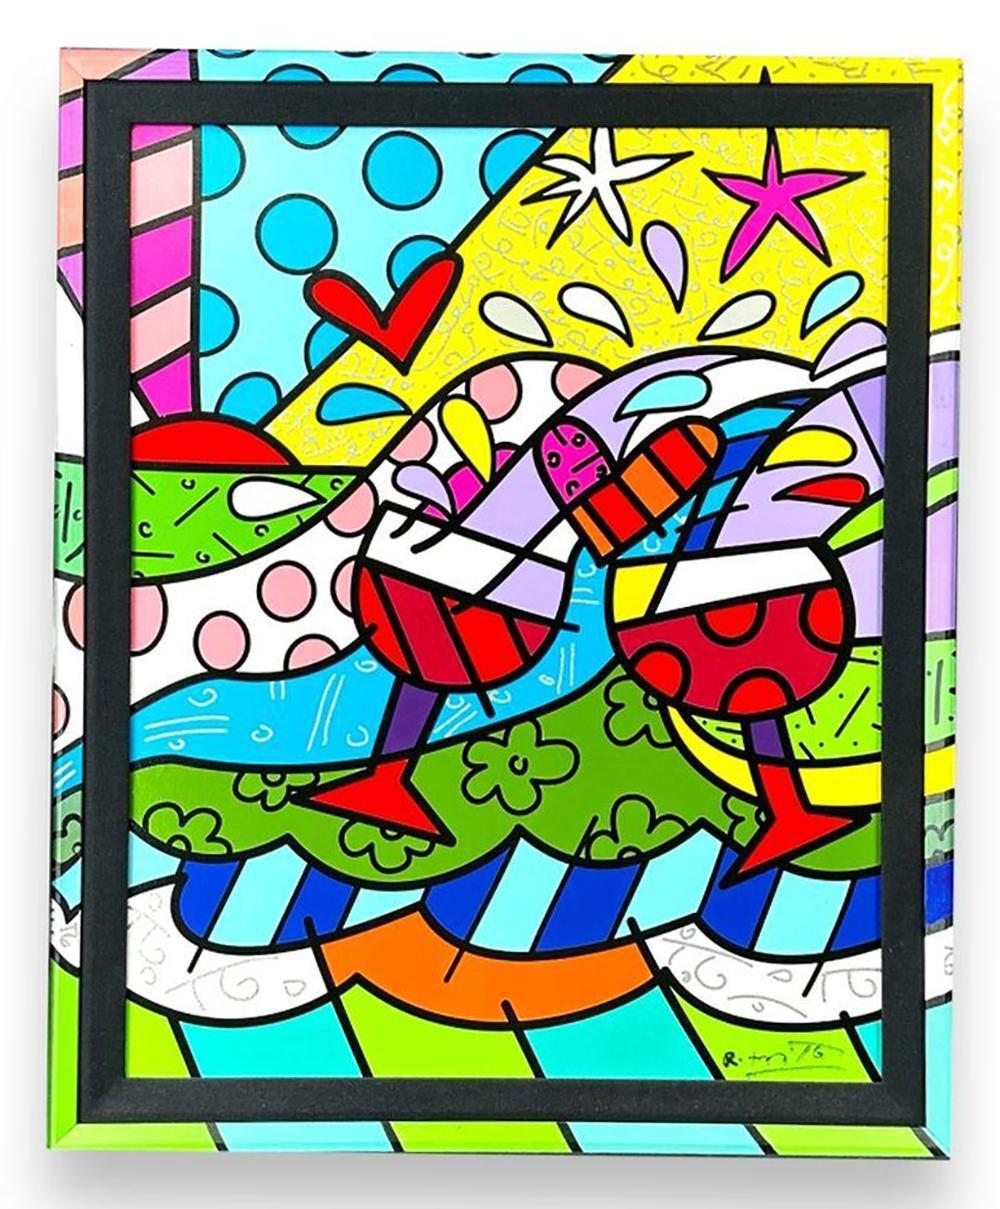 ROMERO BRITTO 'WINE COUNTRY RED' SIGNED & NUMBERED ON CANVAS - Print by Romero Britto